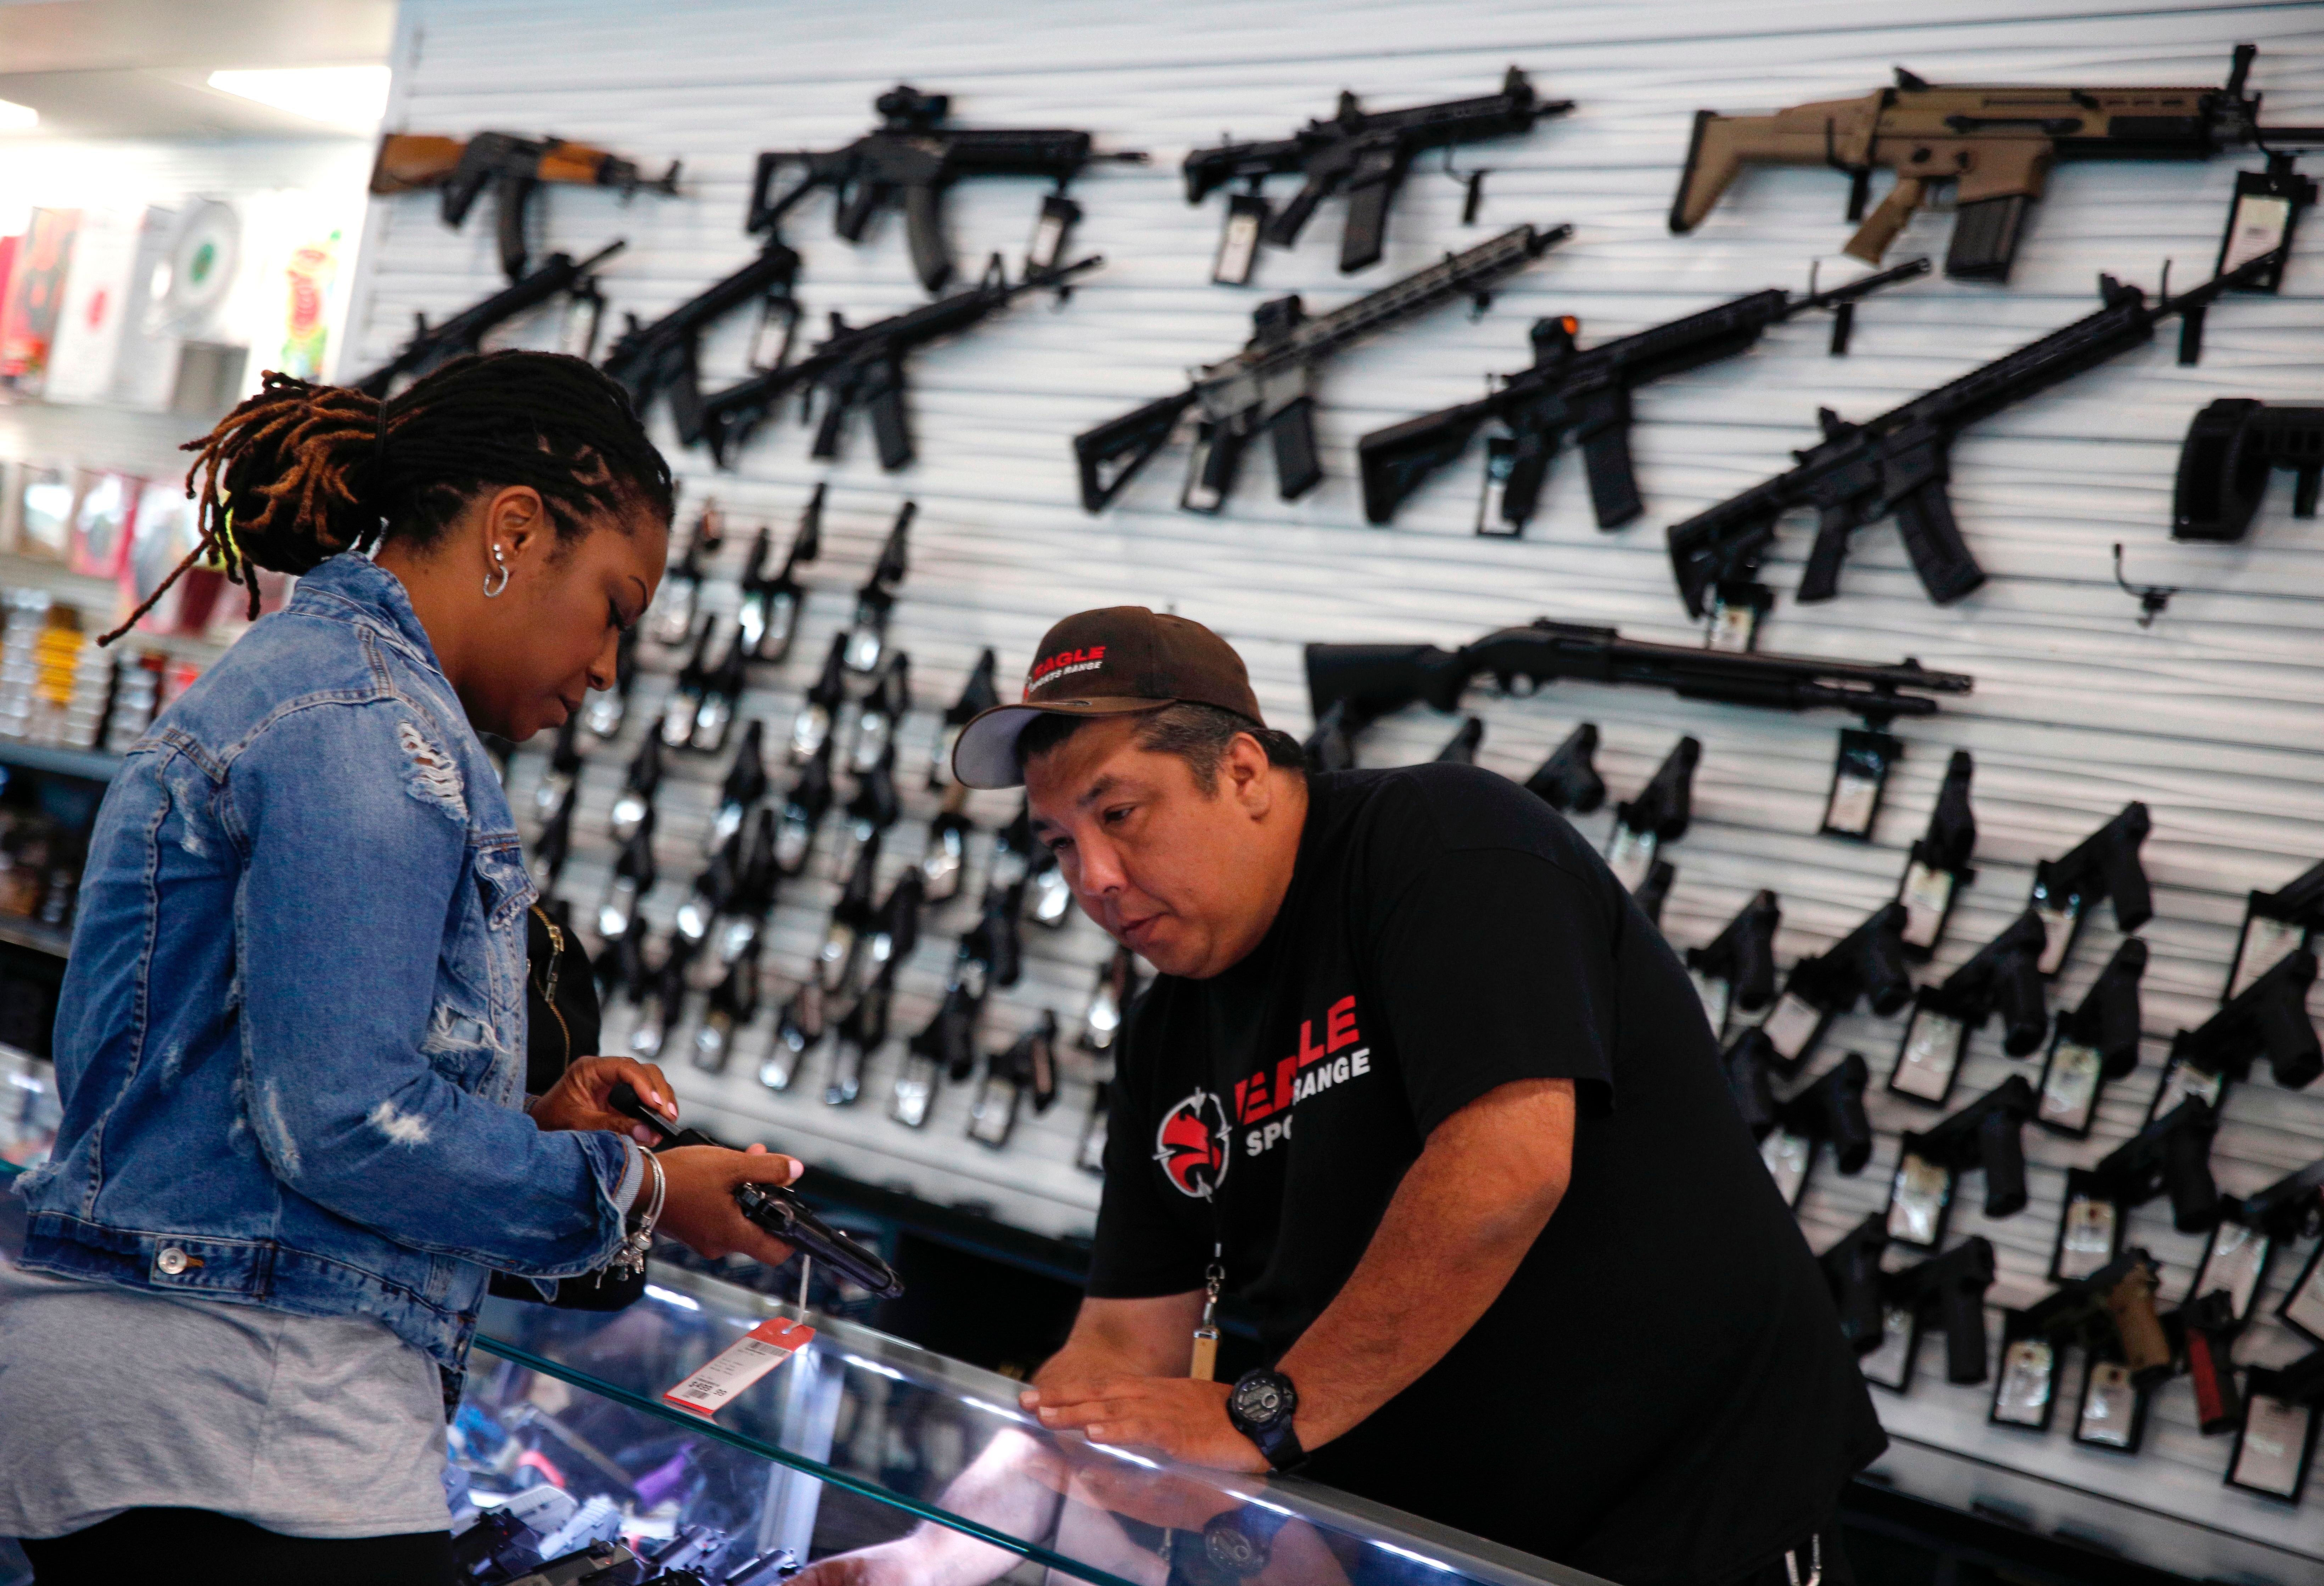 The Number Of Black Women Applying For Concealed-Carry Gun Permits Surges In Chicago
